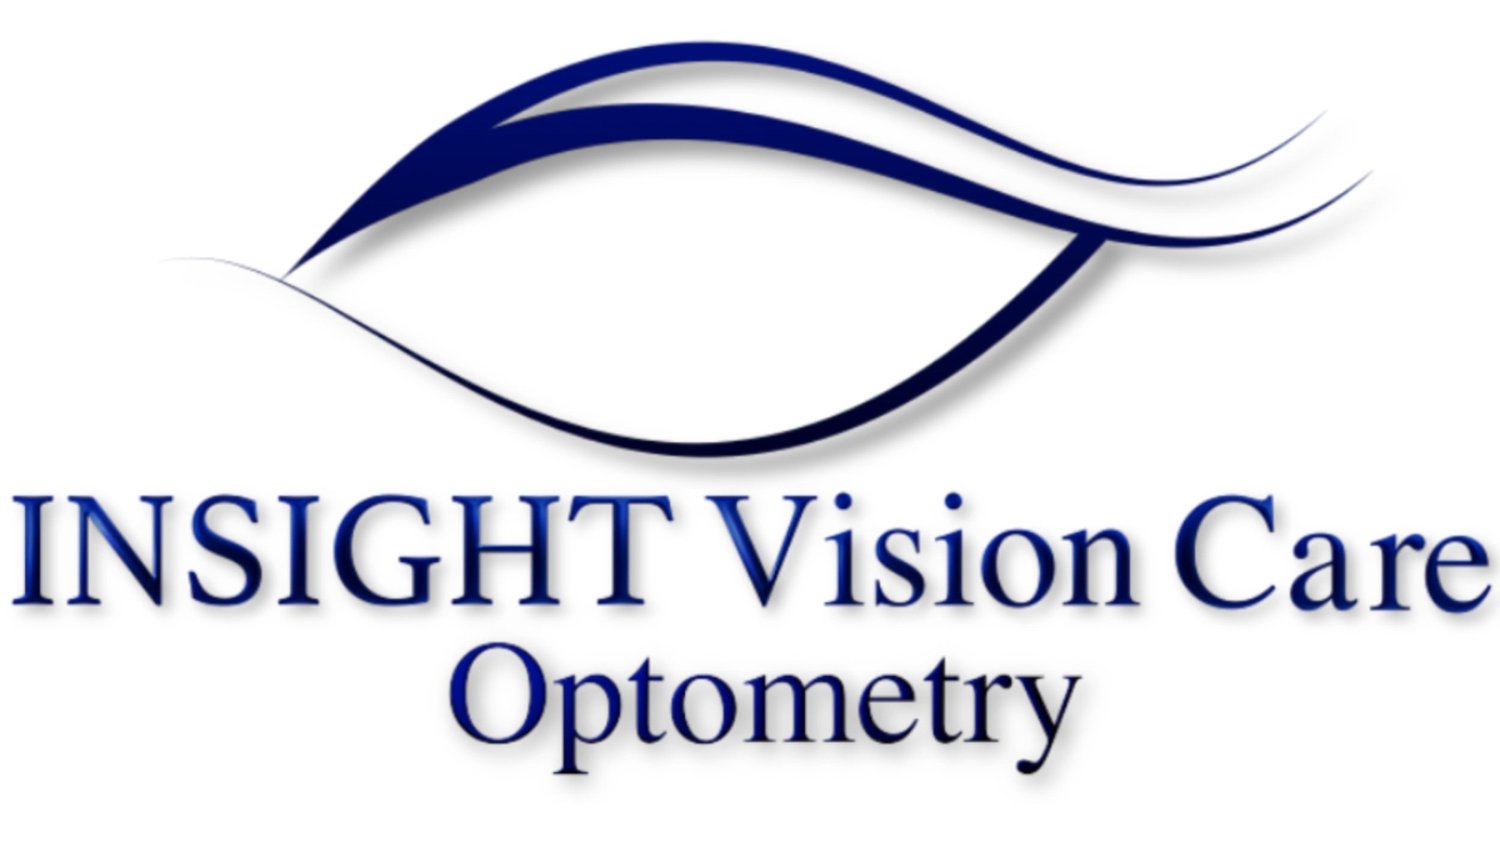 Insight Vision Care Optometry